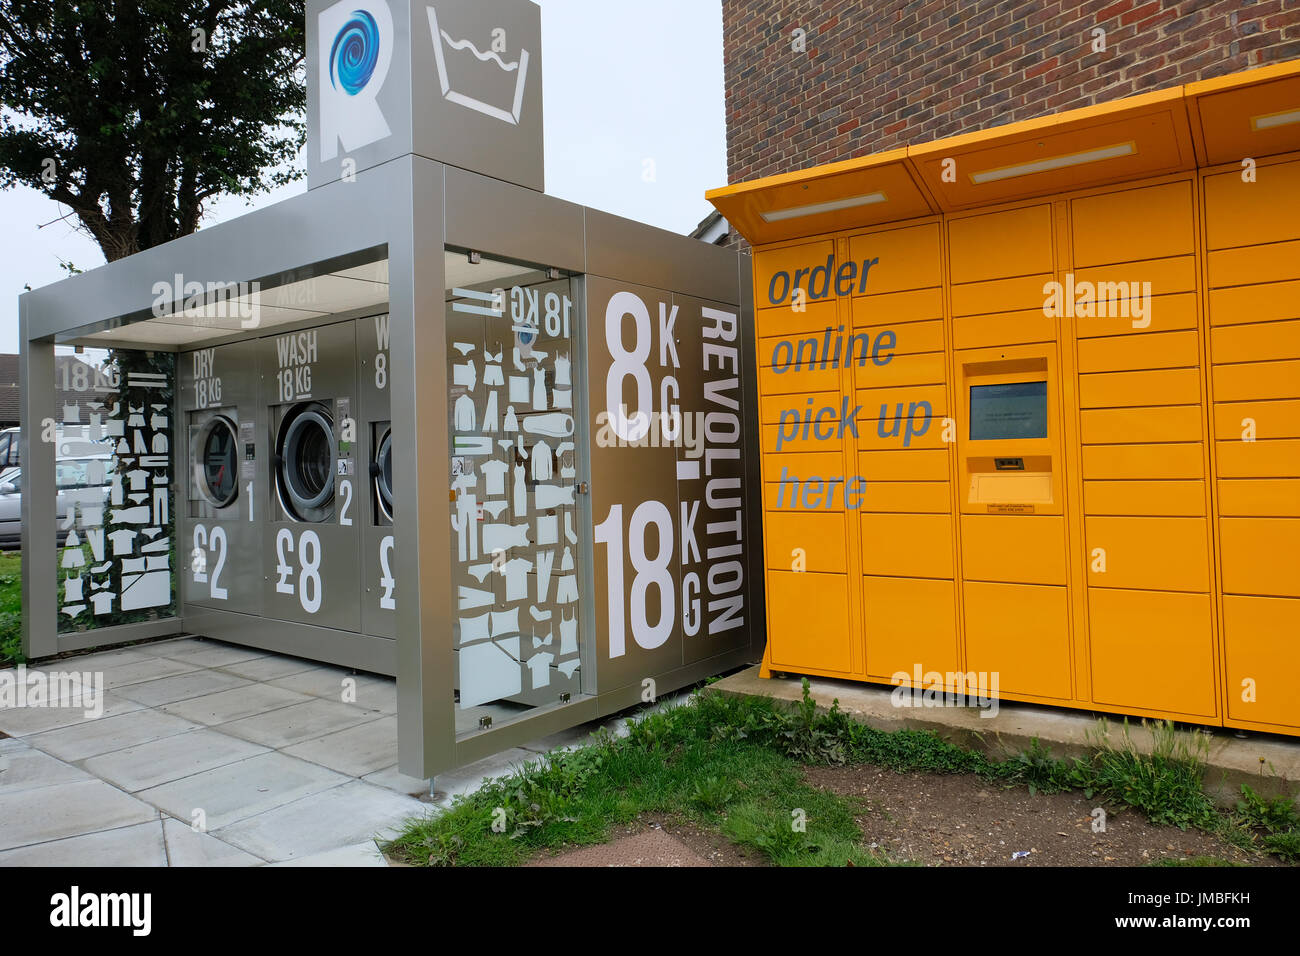 Amazon Locker and outdoor washing machines and tumble dryer side by side in service station forecourt. Worthing, UK Stock Photo